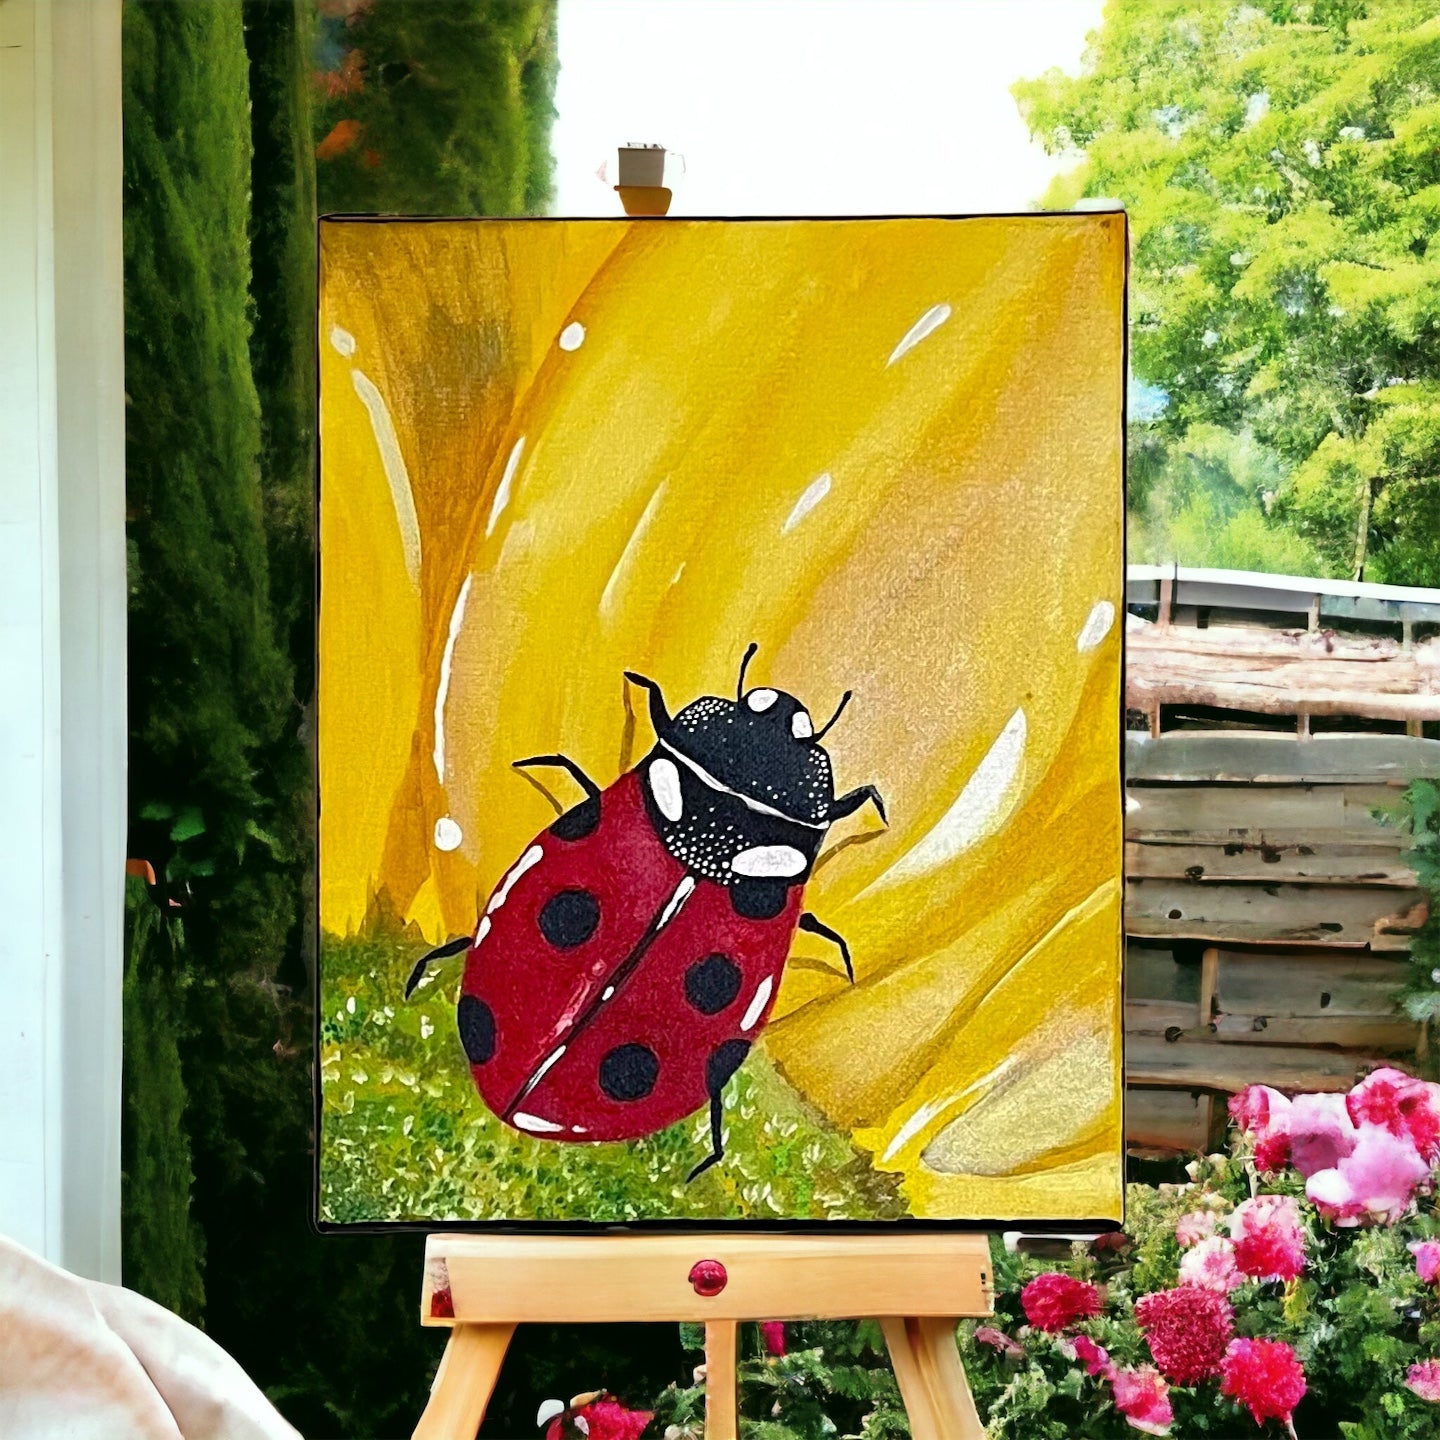 “Love Bug” by Darby Carden